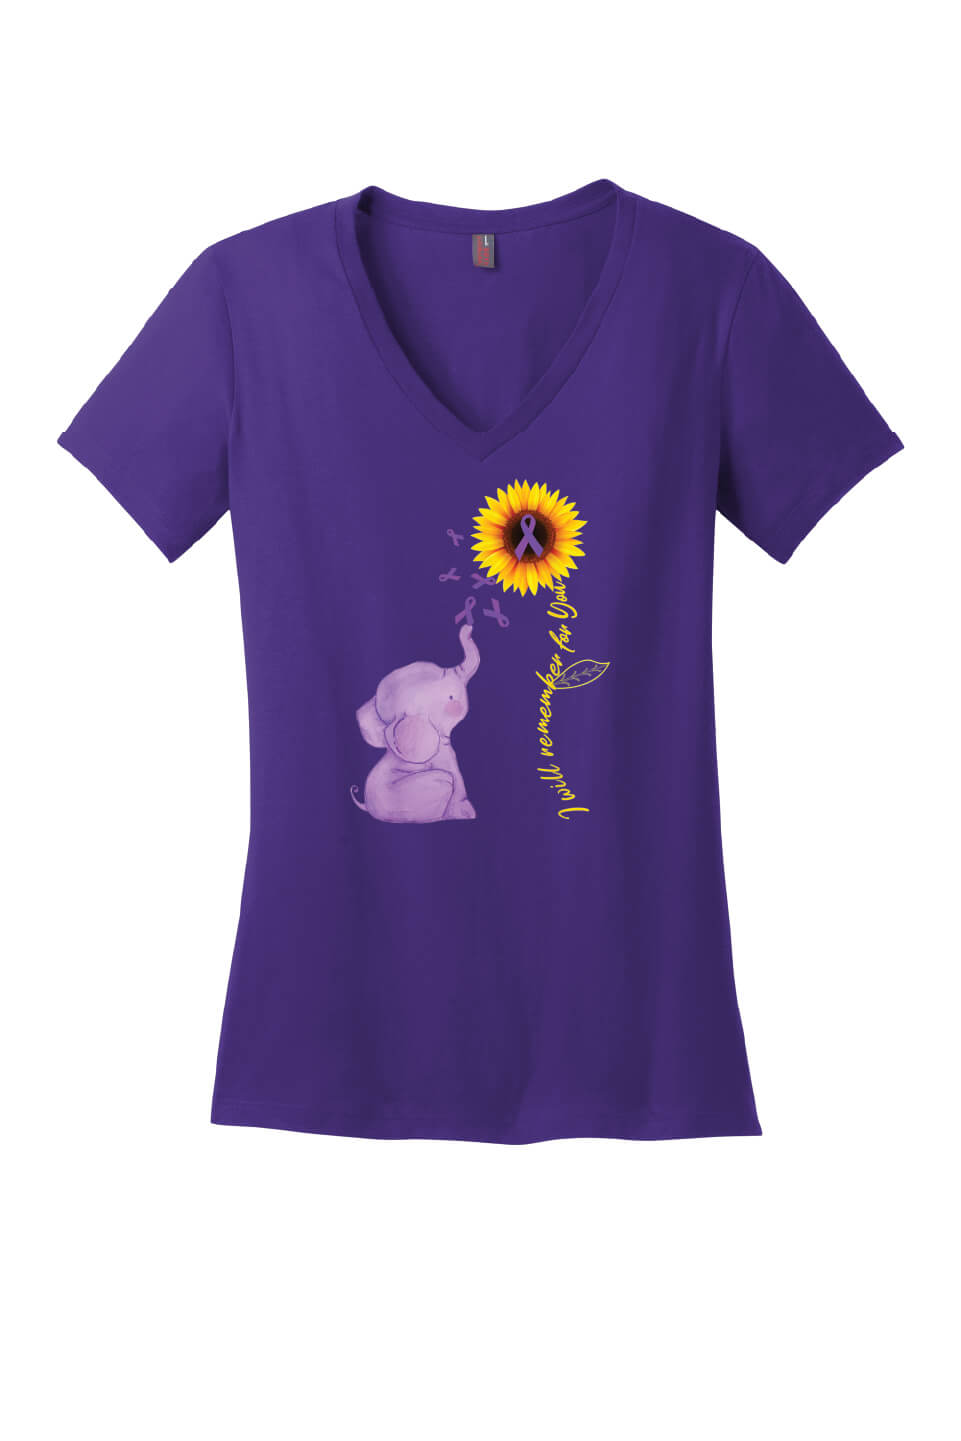 I Will Remember For You Ladies V-Neck Short Sleeve T-Shirt purple